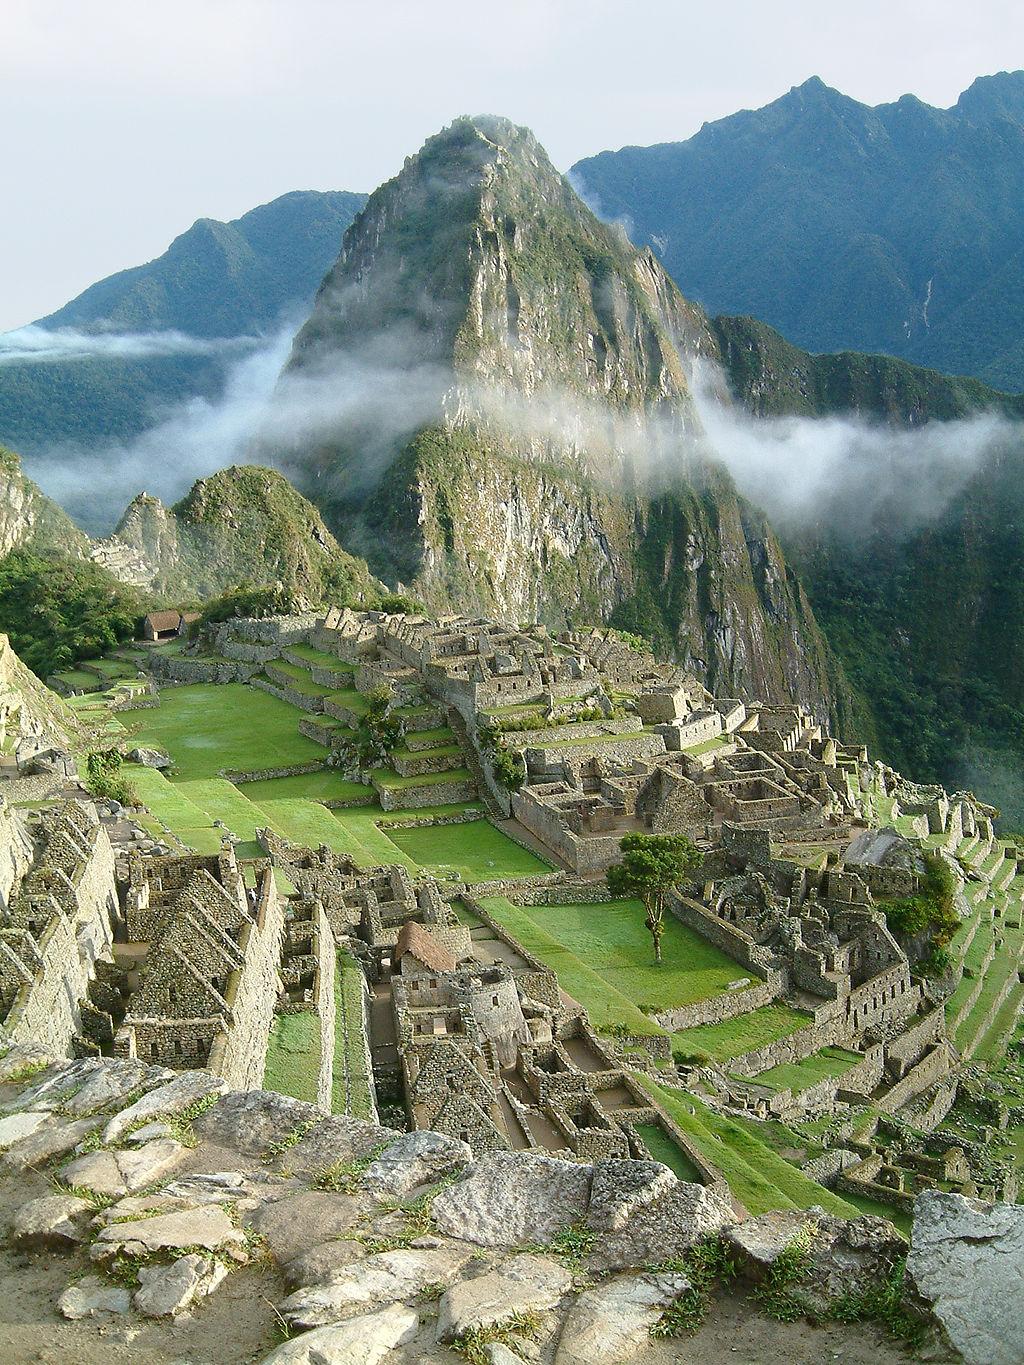 Trek an ancient hidden Inca trail all the while enjoying luxury of private lodges, exclusive chefs and world-class care.